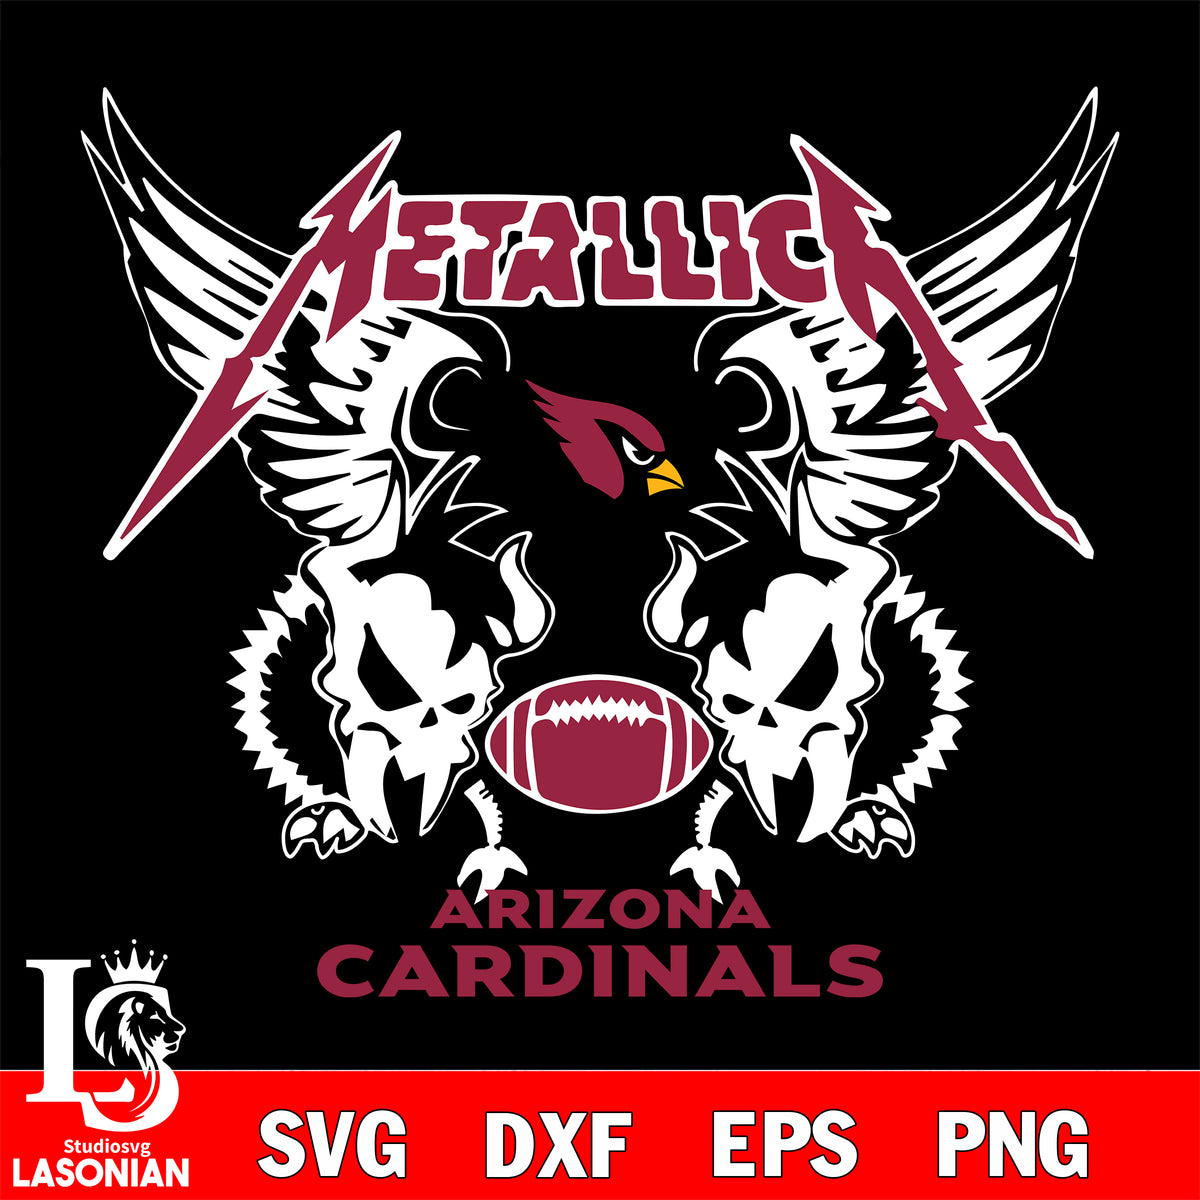 Arizona Cardinals SVG - Instant Download For Silhouette and Cricut